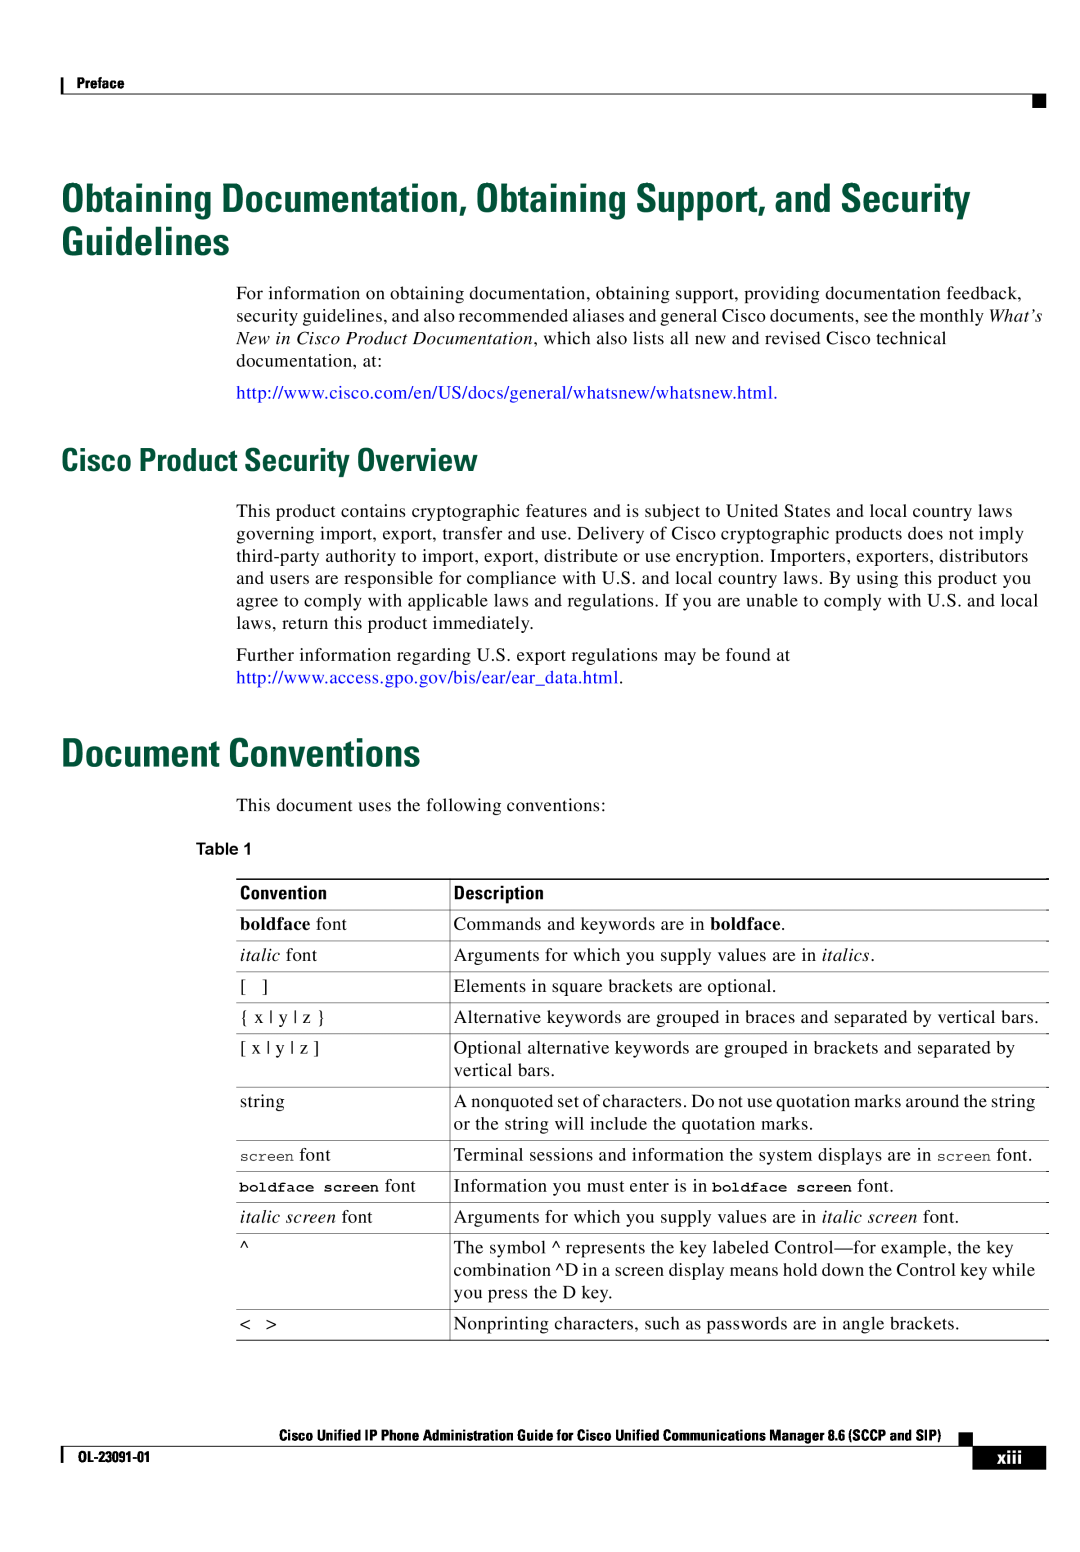 Cisco Systems OL-23091-01 Obtaining Documentation, Obtaining Support, and Security Guidelines, Document Conventions, xiii 